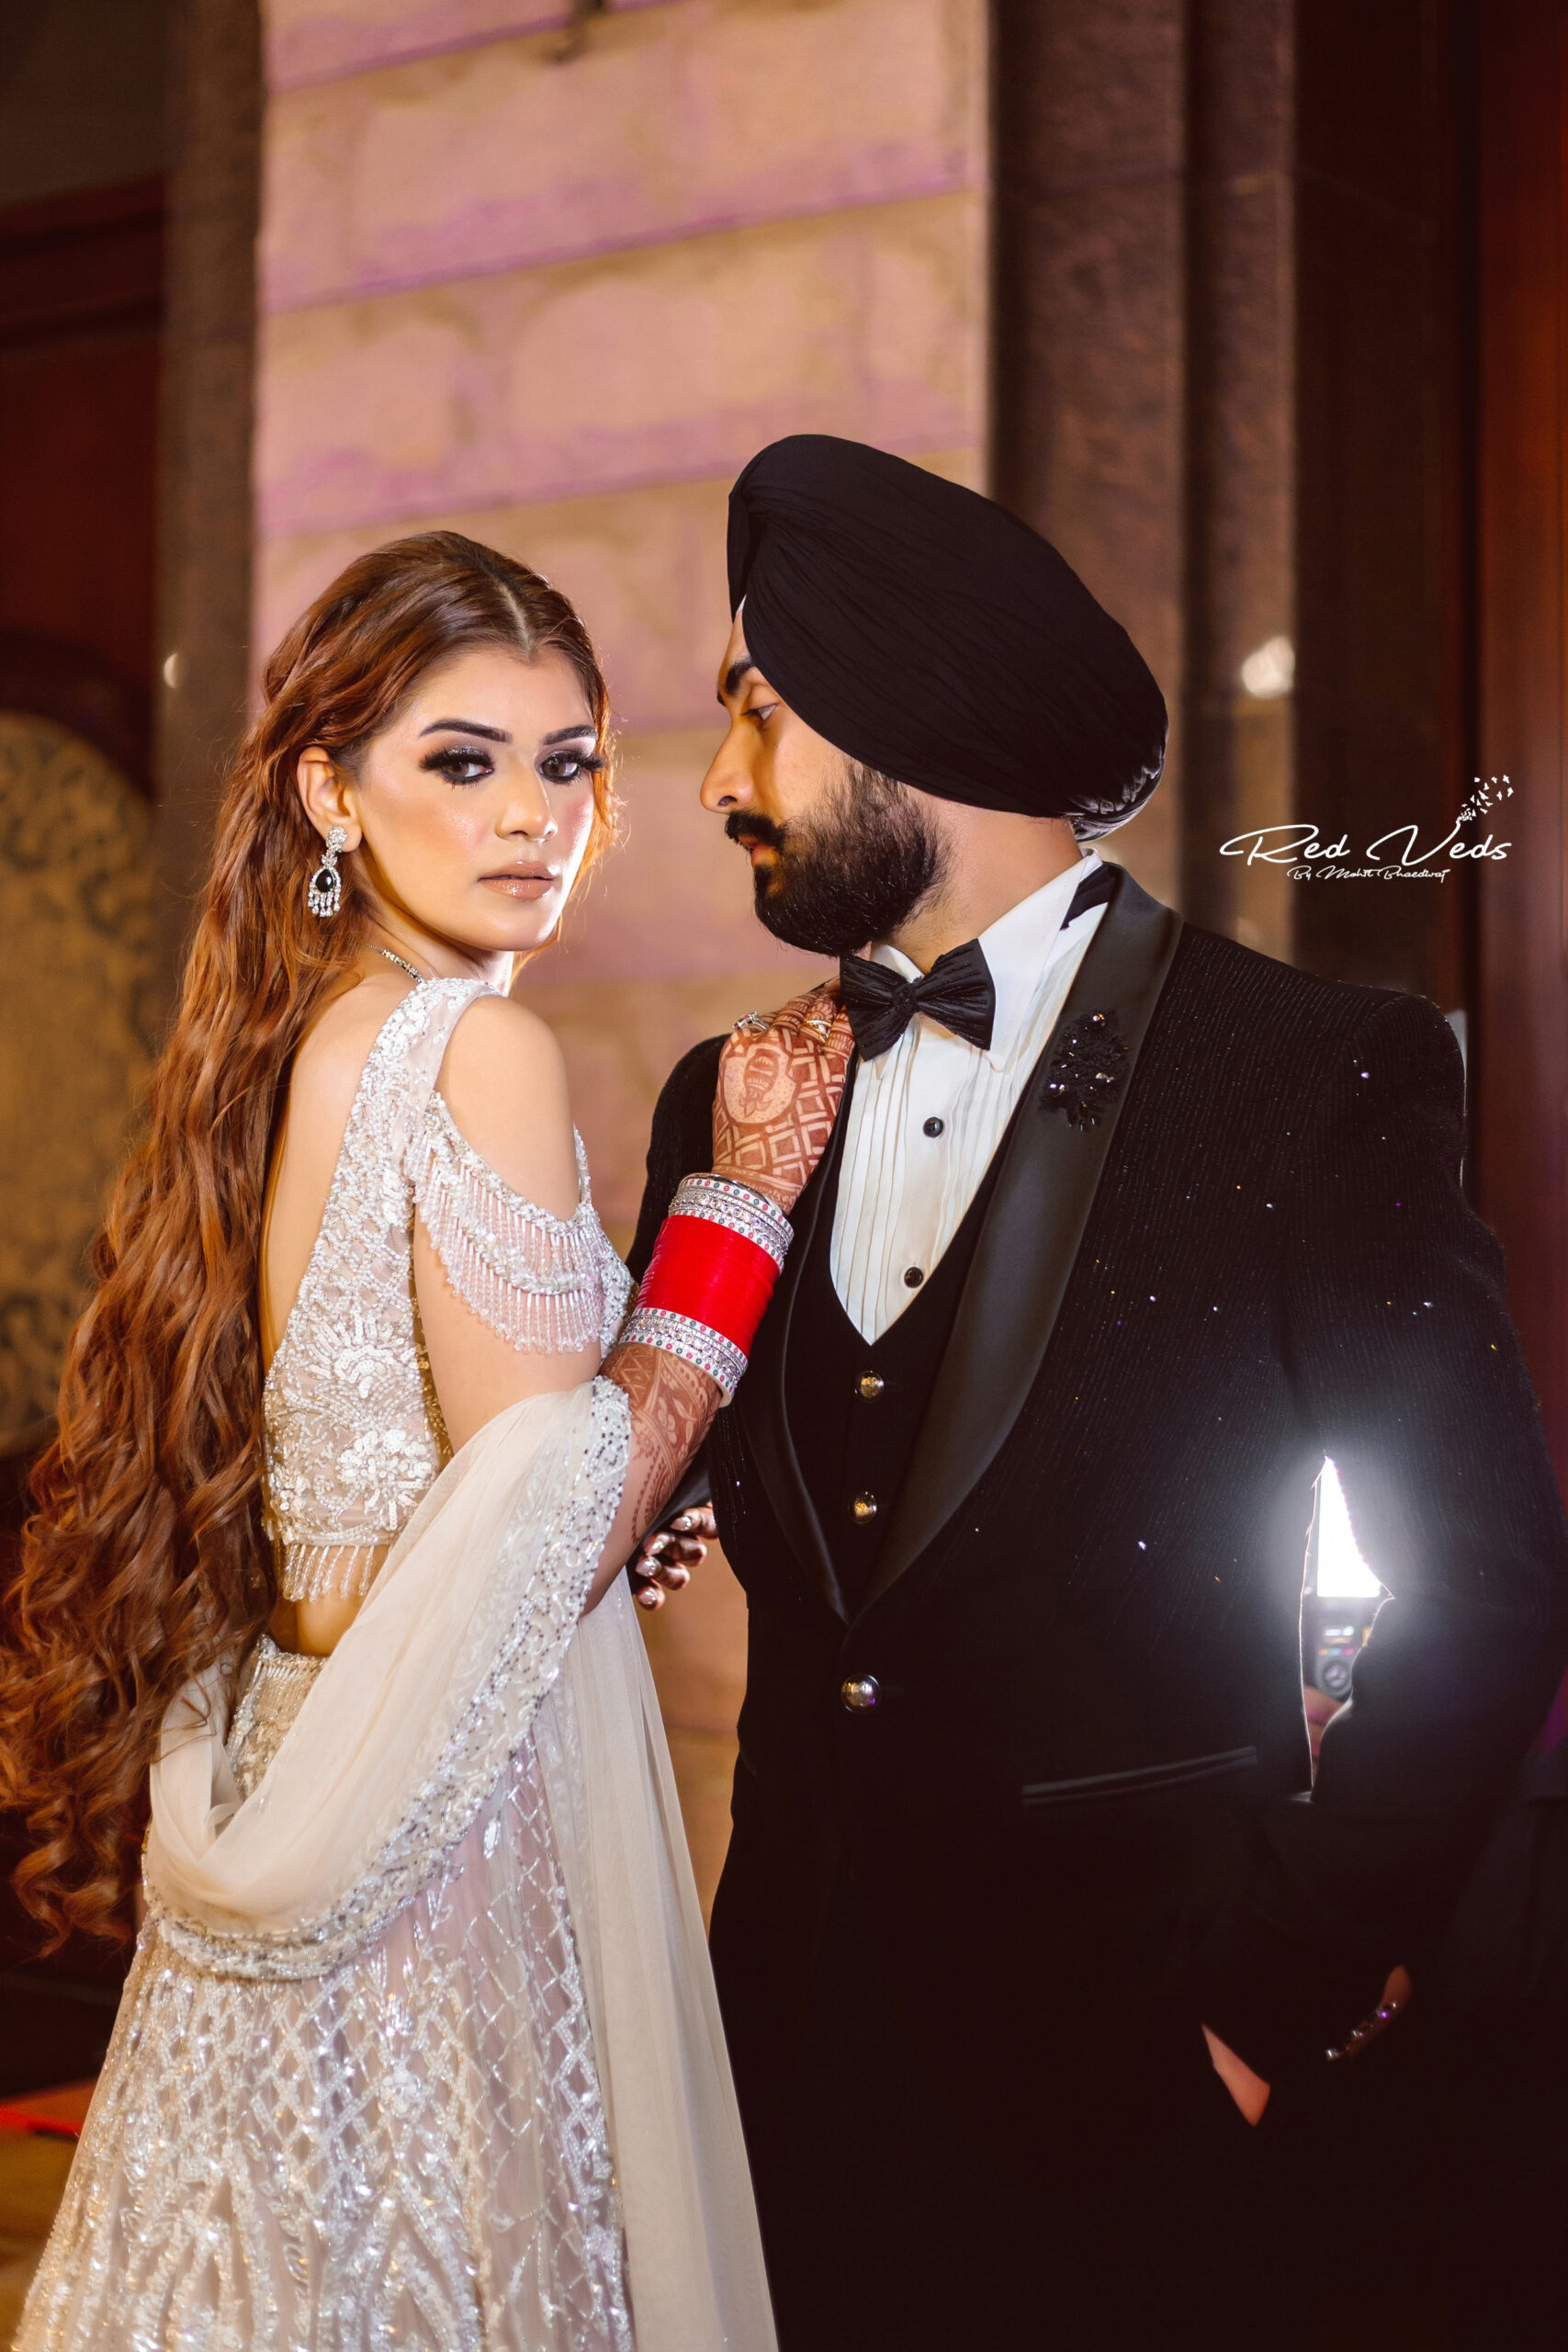 MPW Media Group - Our first Indian wedding was Sameep's brother back 2012.  Saheel Chandrani and his bride Kaveeta Chandrani has big doubt before  booking MPW because we haven't shot any Indian